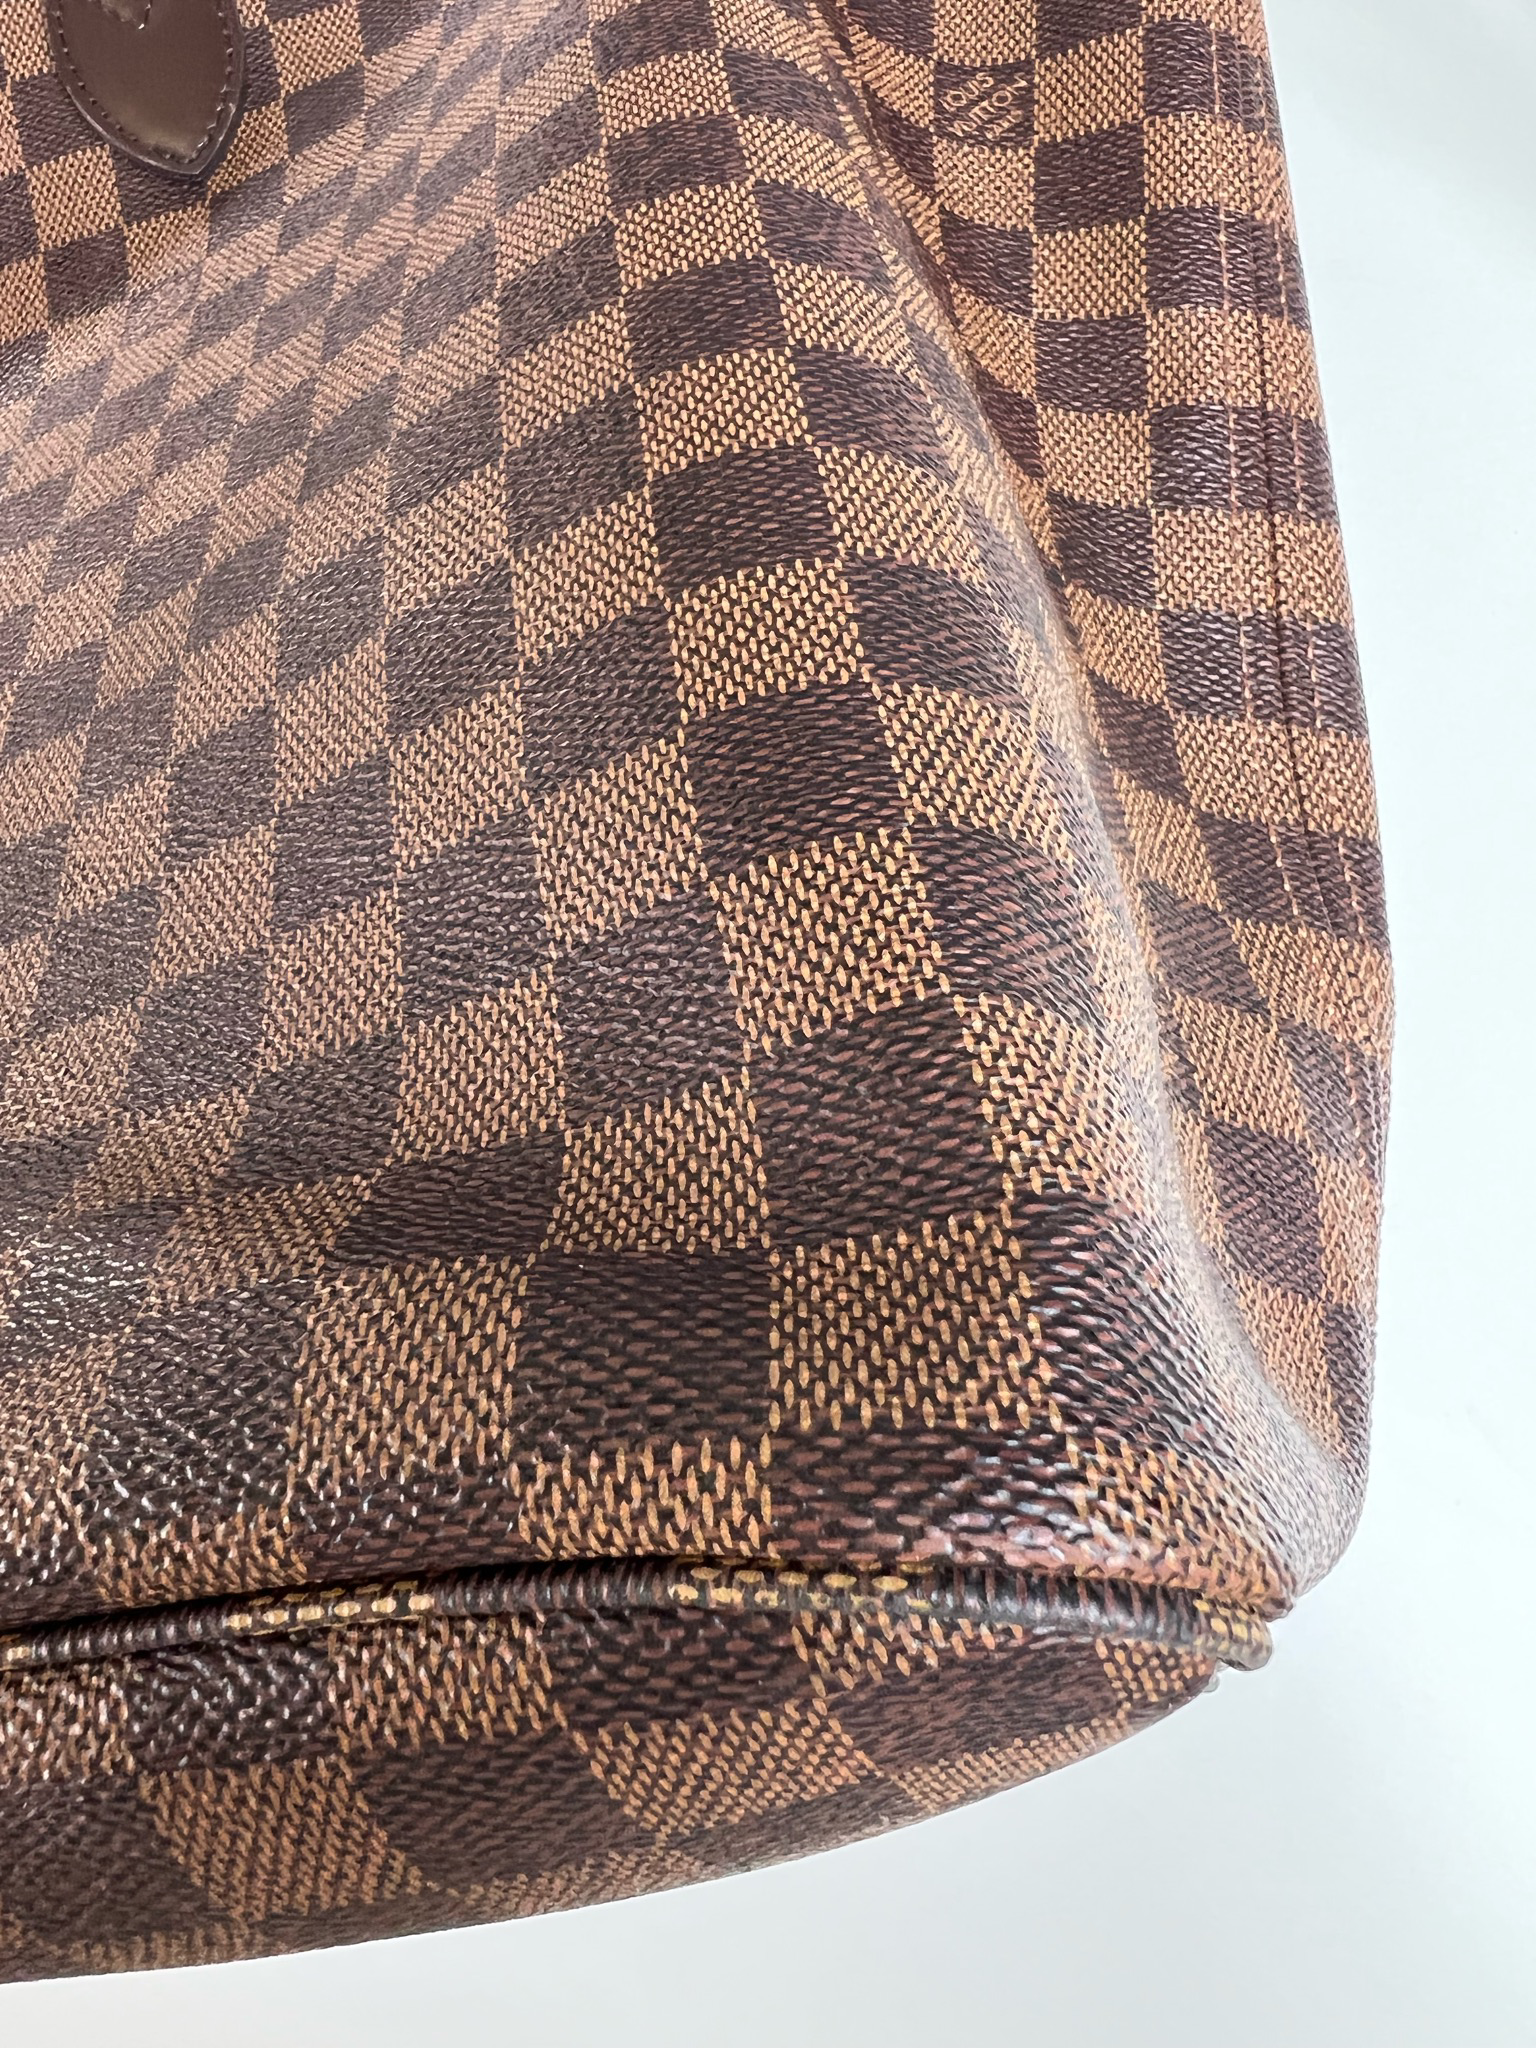 Louis Vuitton Neverfull GM with Pouch, Damier Ebene, Preowned in Box WA001